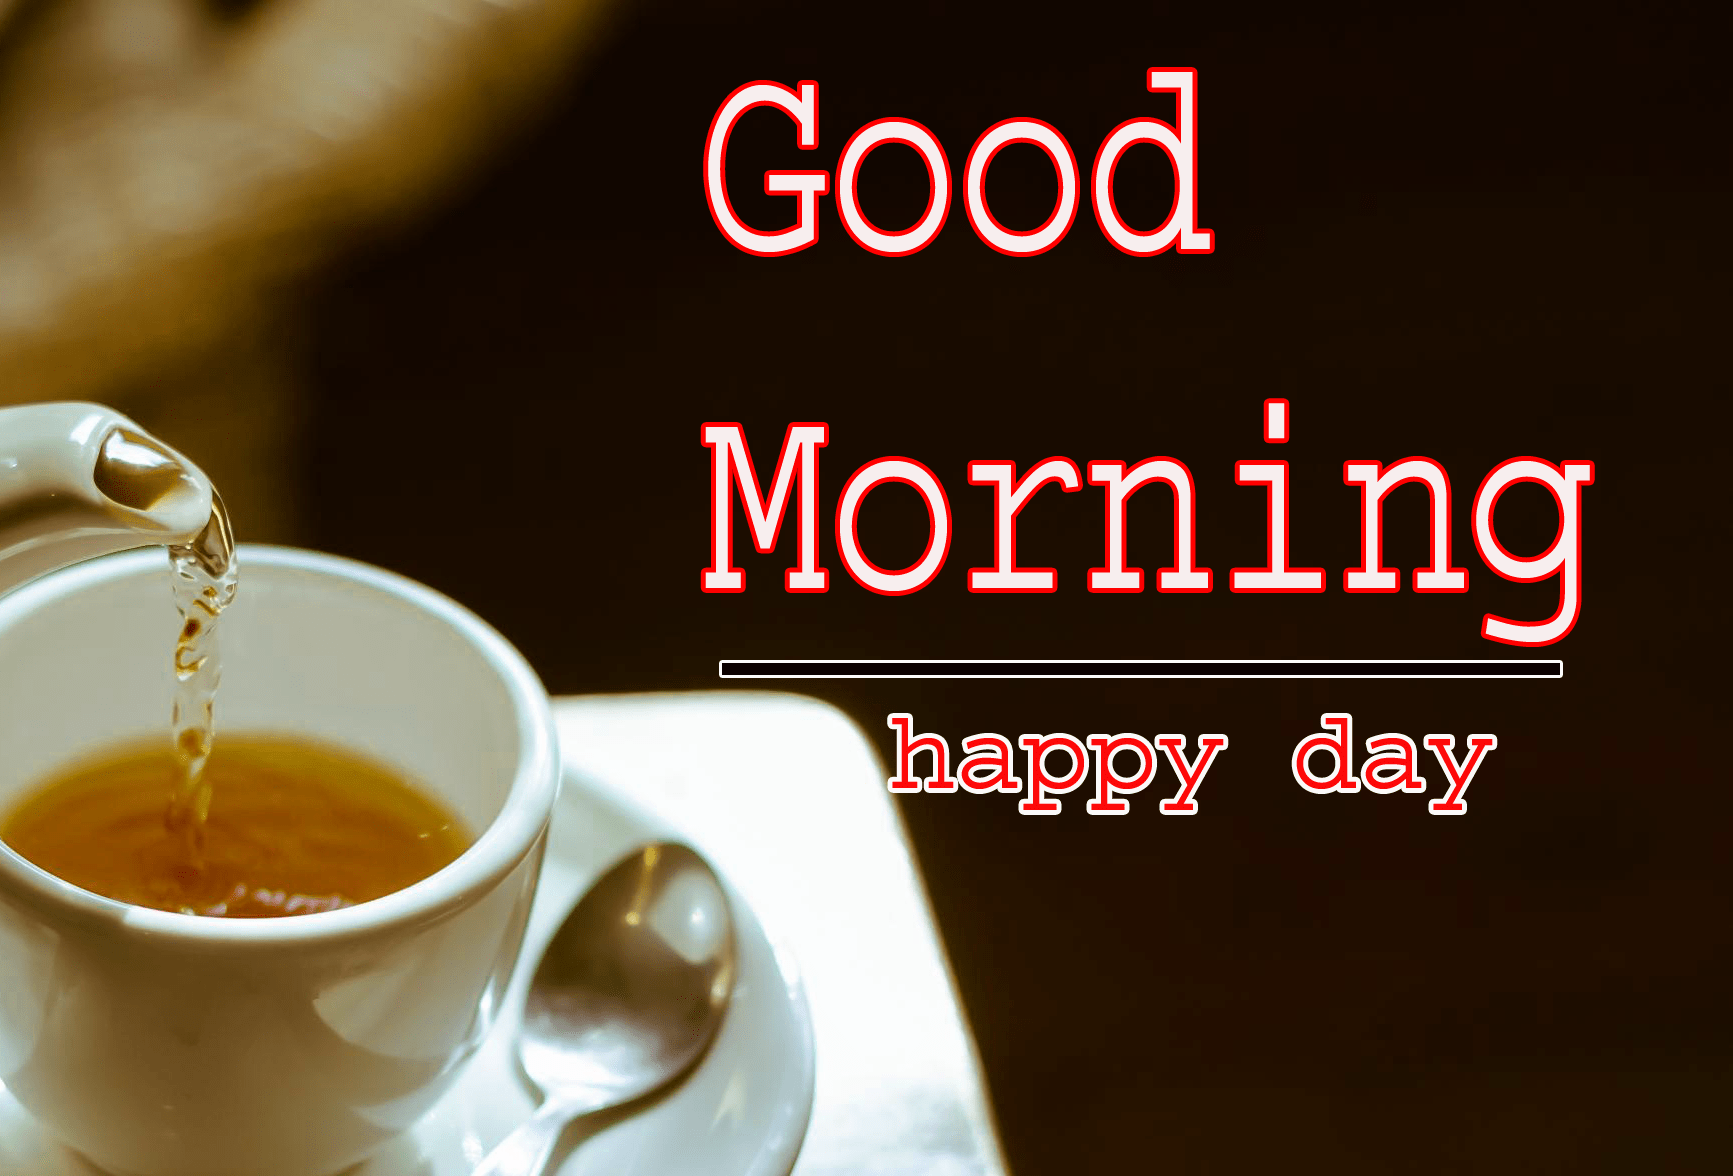 4k Ultra Free good morning Images With Tea Coffee